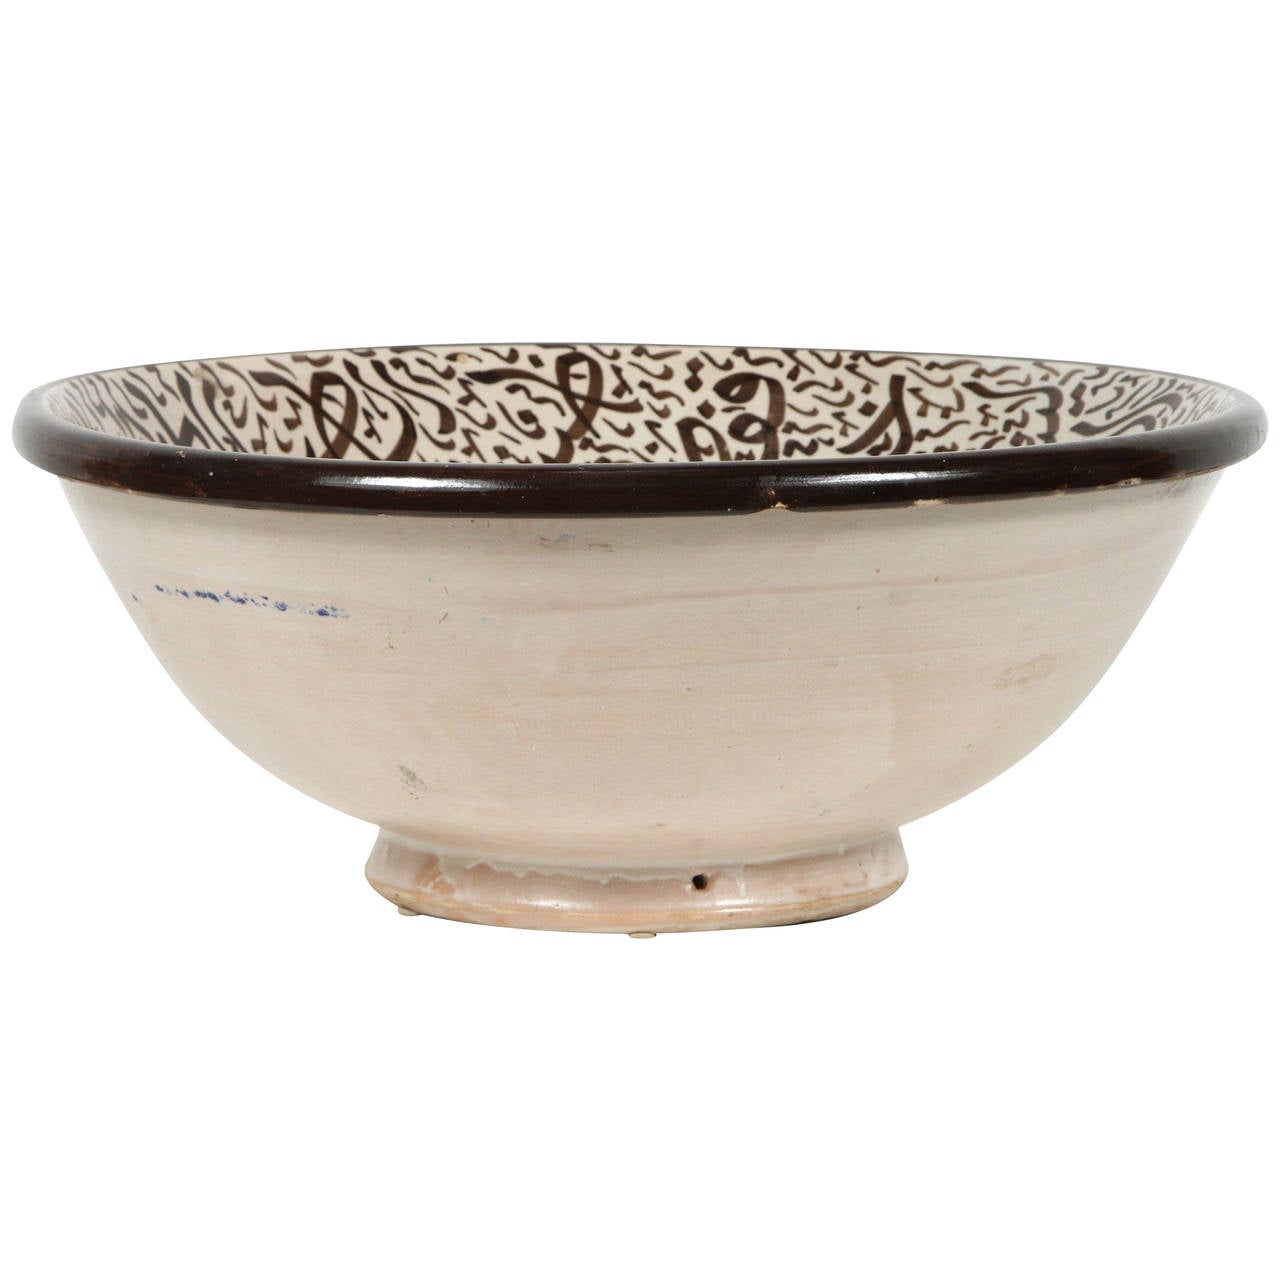 Large Moroccan ceramic bowl with Arabic calligraphy.
Handcrafted ceramic from Fez Morocco, hand-painted with Arabic writing.
This kind of Art Writing looks calligraphic is called Lettrism, it is a form of art that uses letters that are not supposed